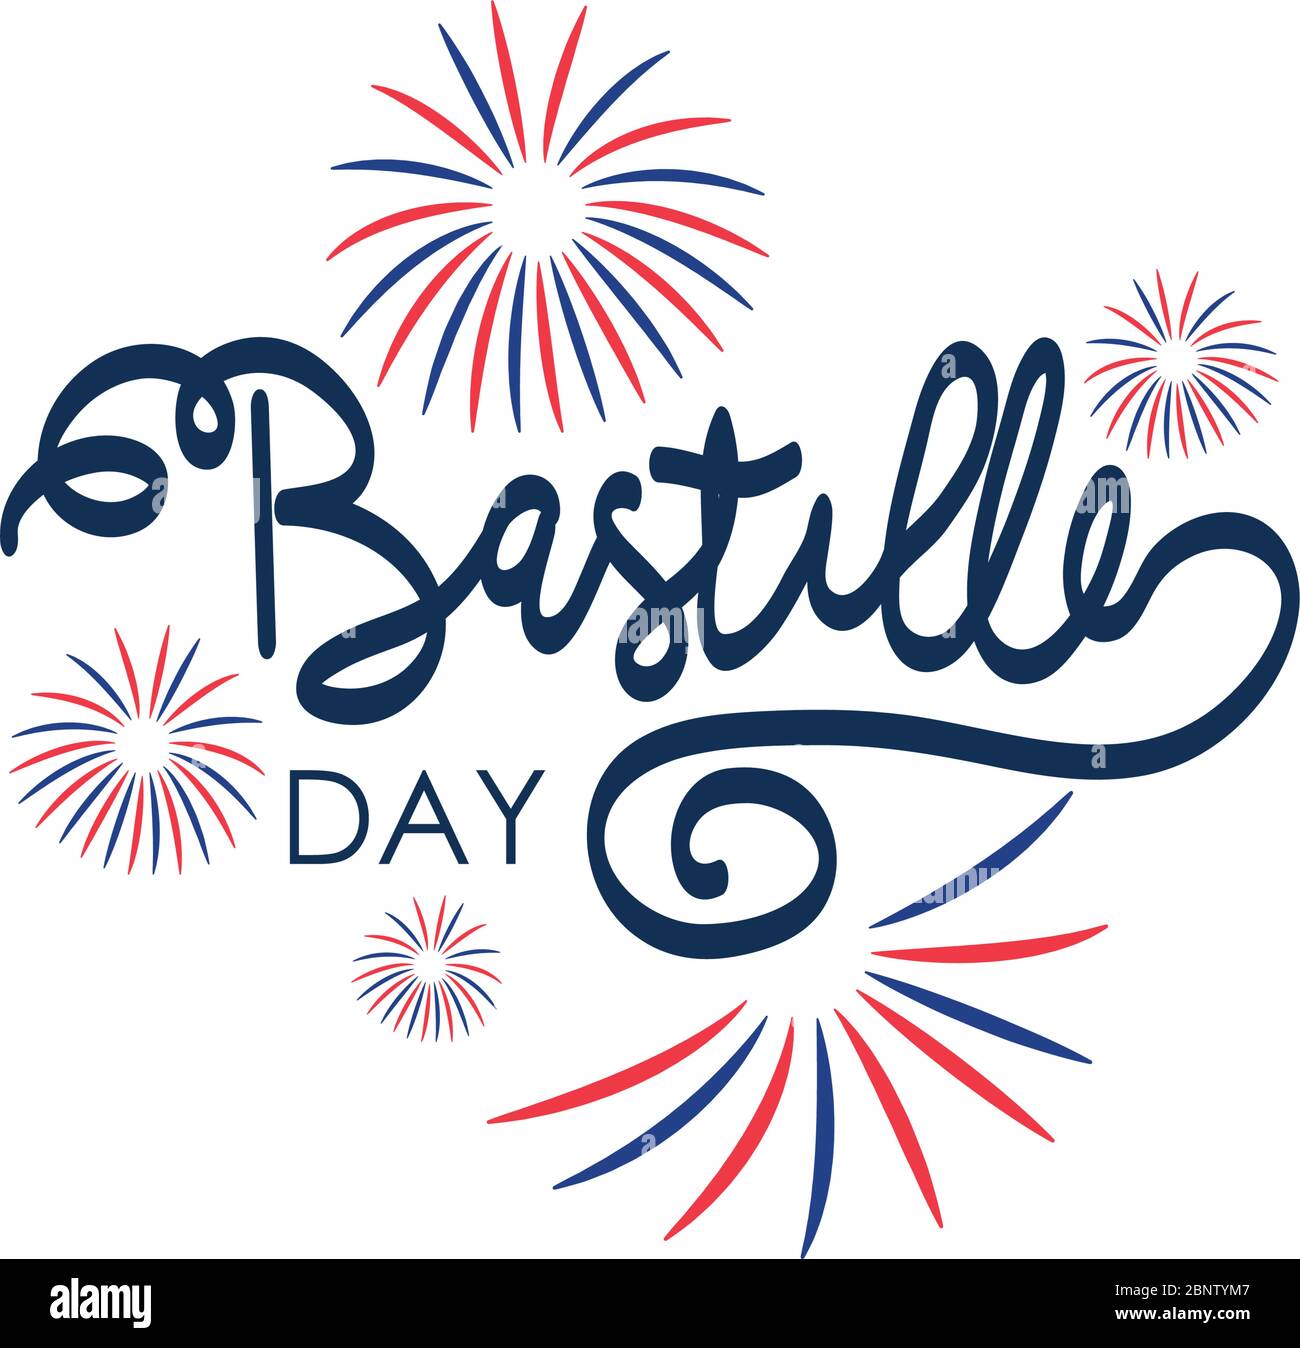 Bastille day lettering design with decorative fireworks over white background, flat style, vector illustration Stock Vector